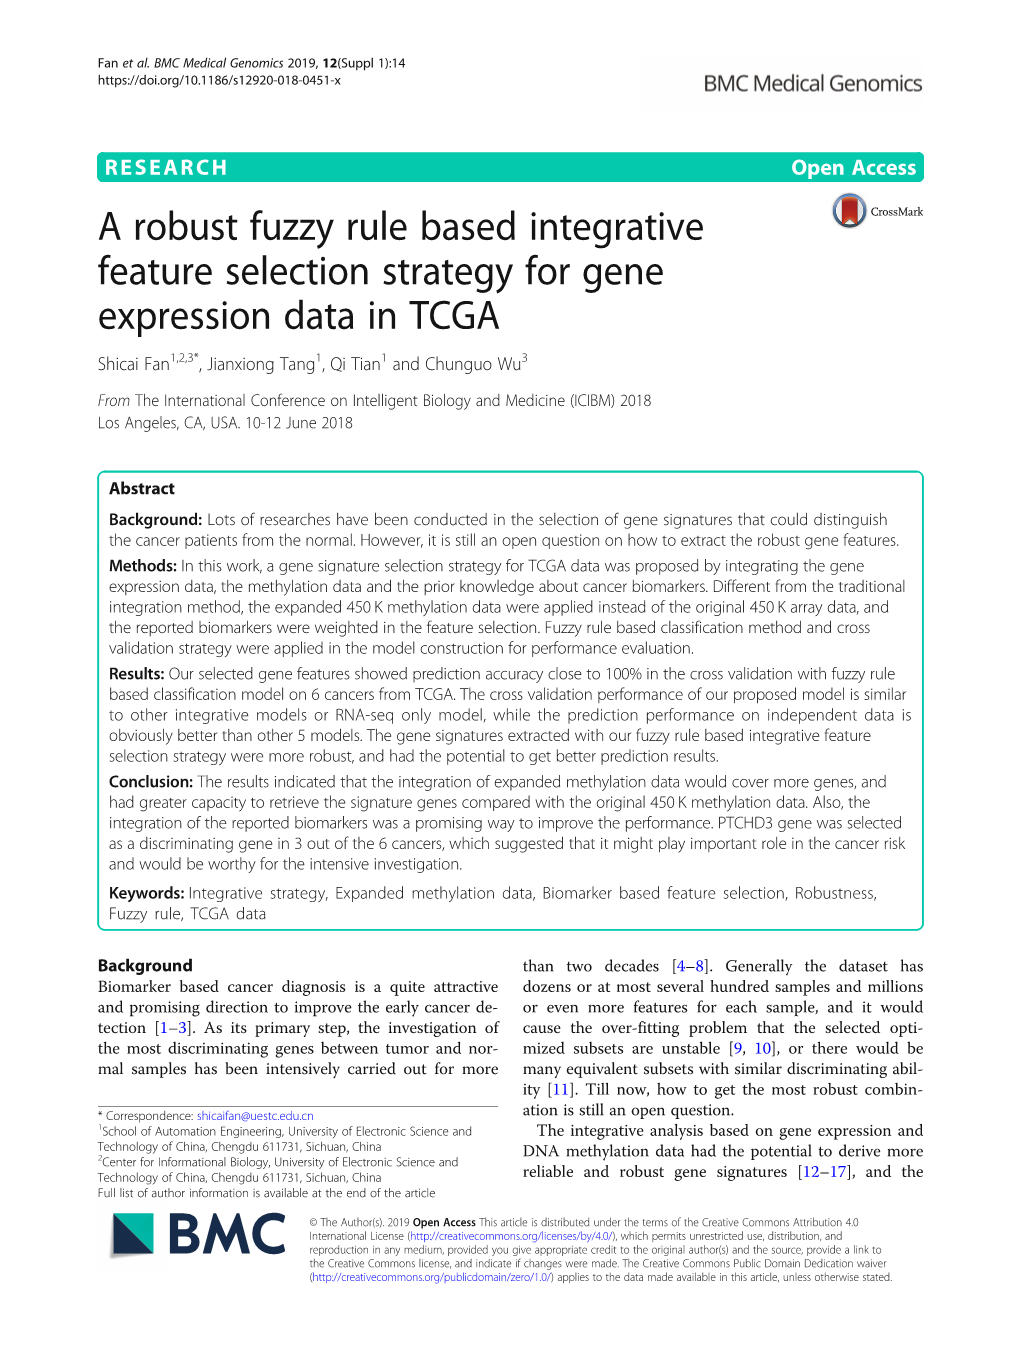 A Robust Fuzzy Rule Based Integrative Feature Selection Strategy for Gene Expression Data in TCGA Shicai Fan1,2,3*, Jianxiong Tang1, Qi Tian1 and Chunguo Wu3